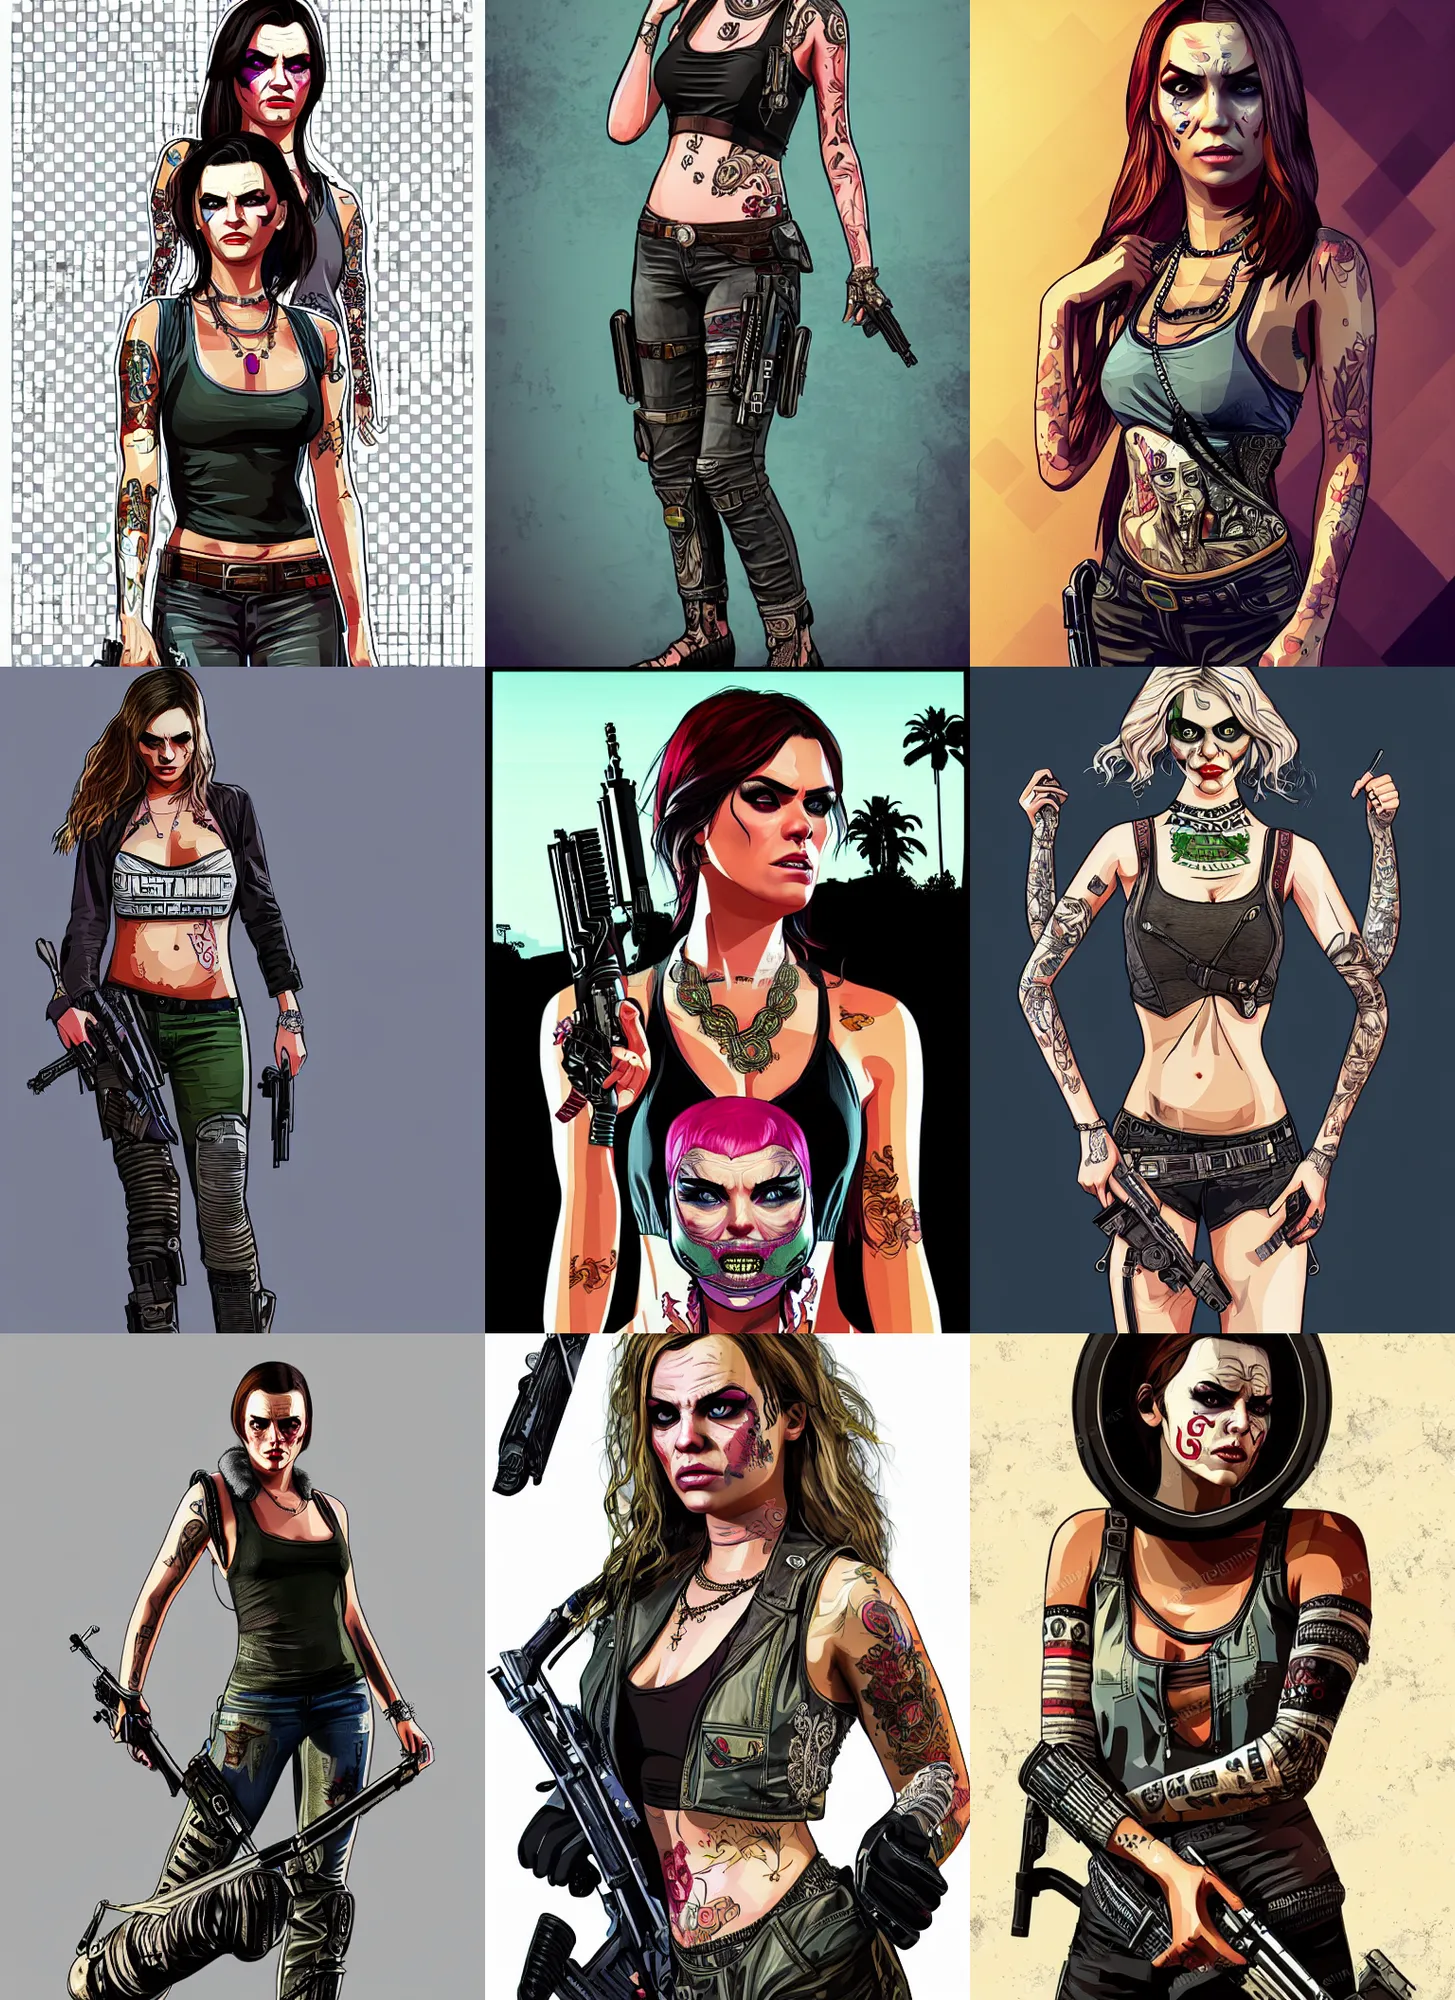 Prompt: gta 5, full body concept, mad max female with beautiful face and eyes wearing intricate clothing, digital illustration in the style of a gta artwork, gta v cover